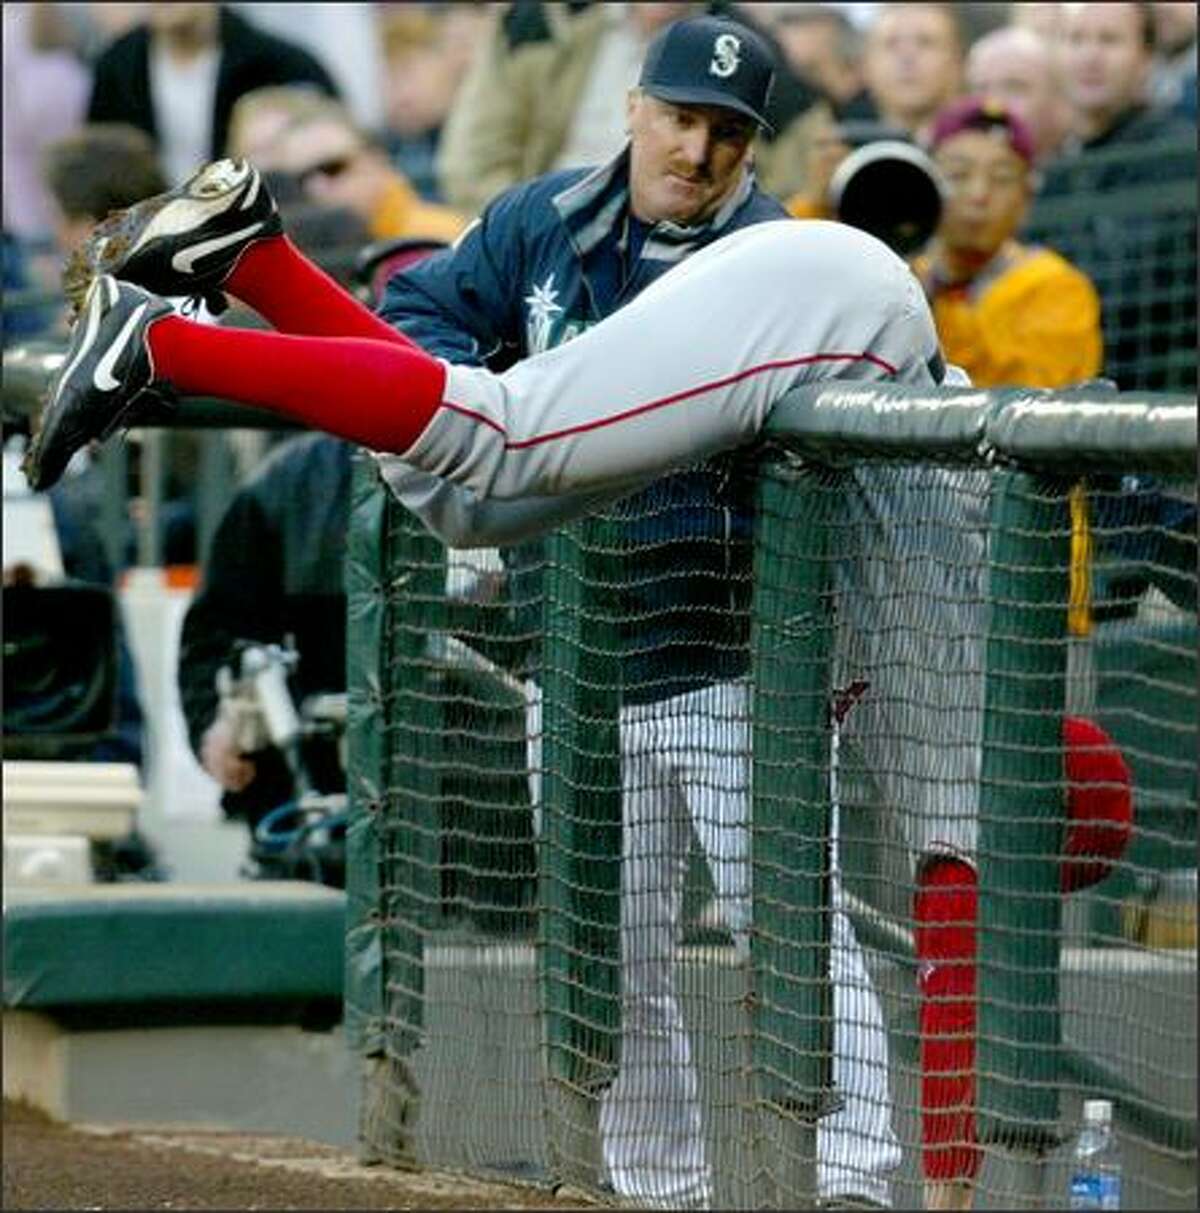 Angels first baseman Darin Erstad hangs over the railing protecting the Mariners dugout as he fails to catch a Bret Boone foul popup.